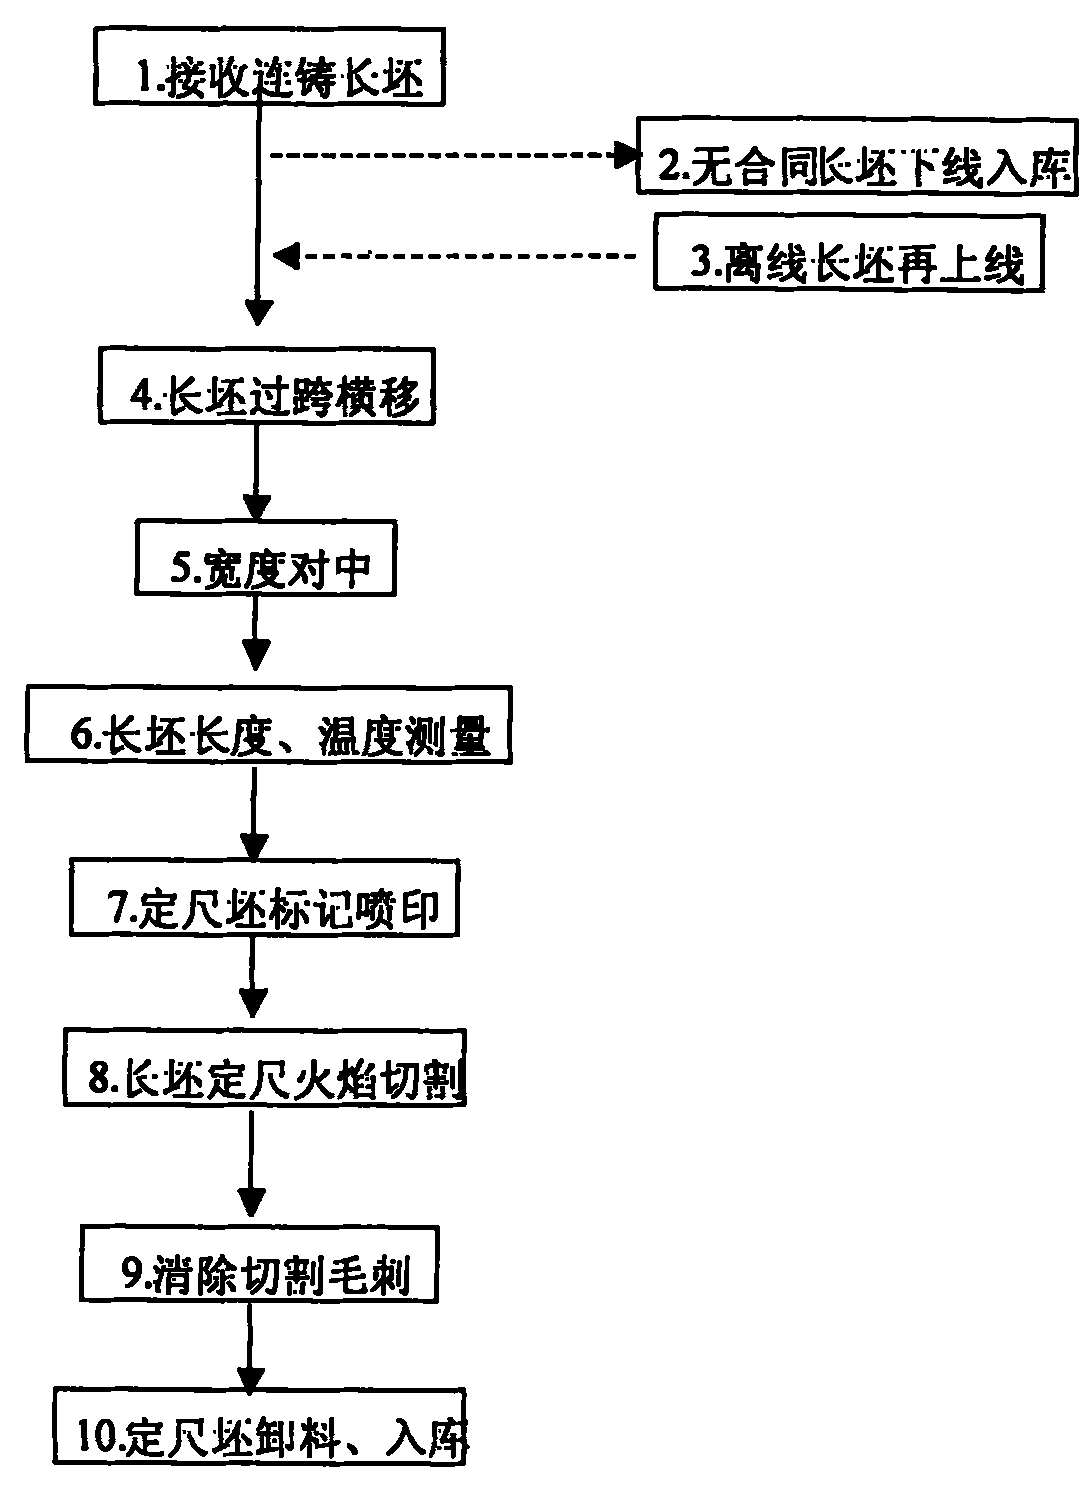 Process for online cut-to-length cutting production of continuous casting slabs for heavy plate mill